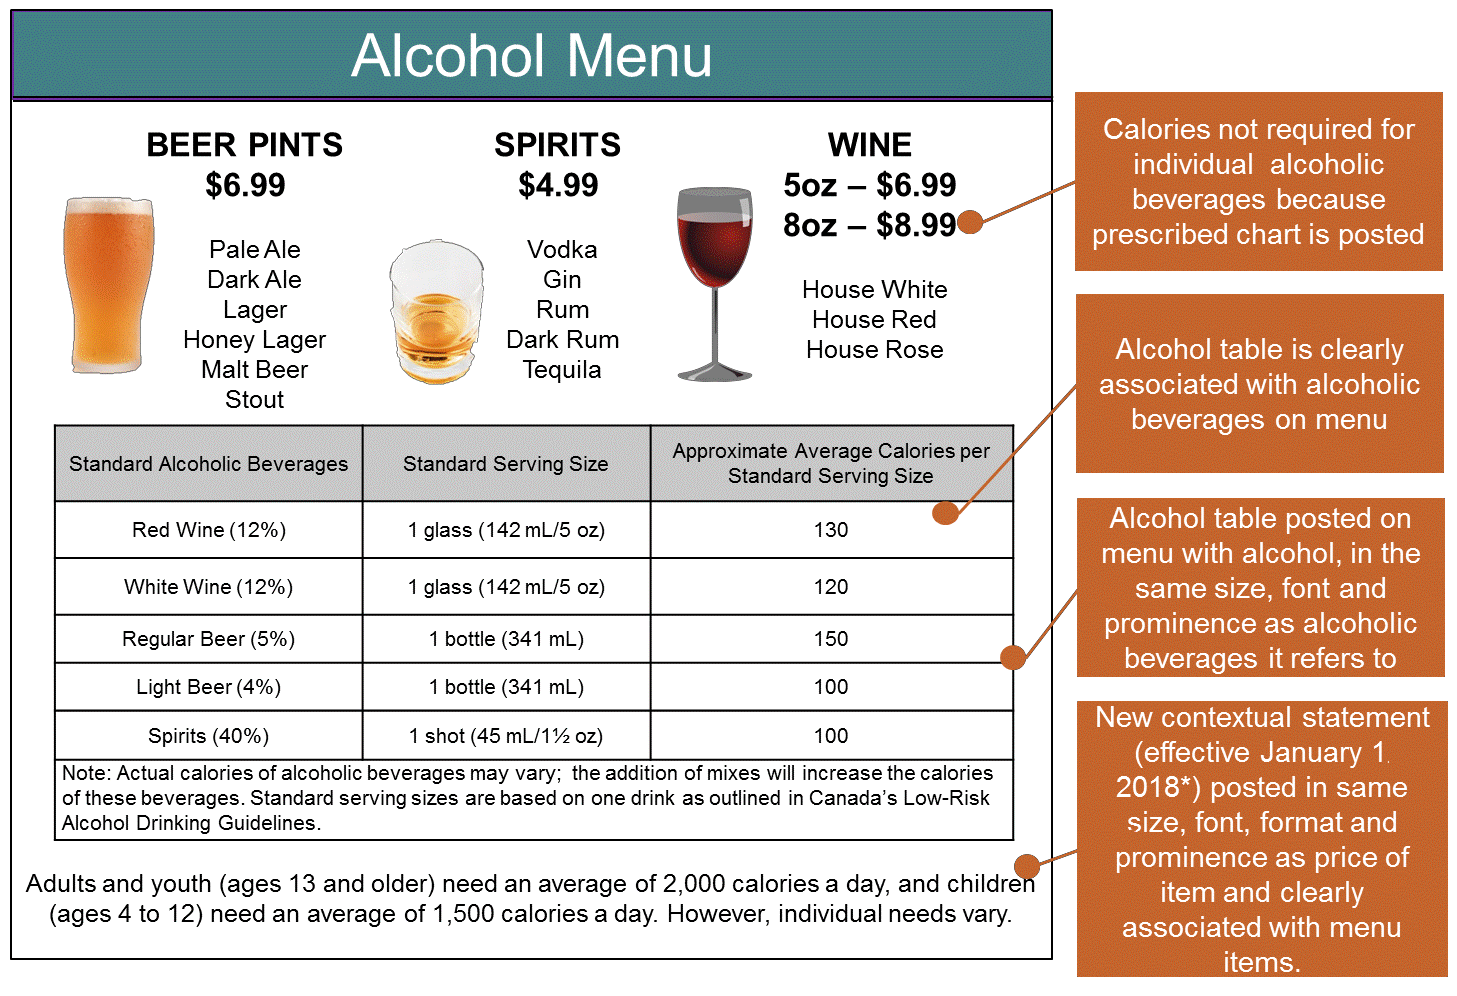 Example #17: Displaying calories for alcoholic beverages using an alcohol table